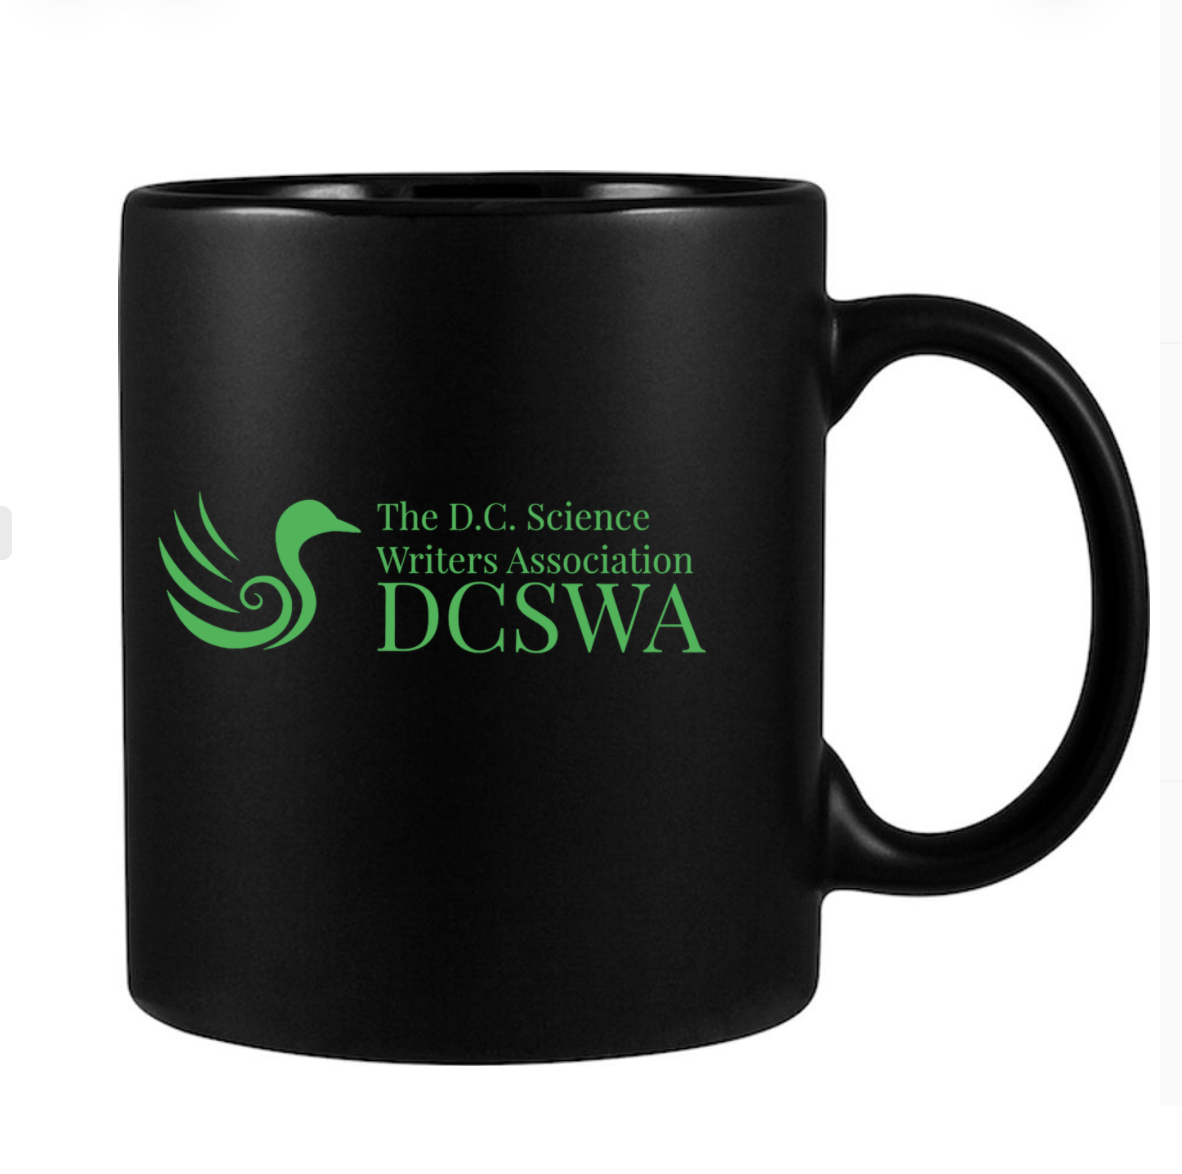 Matte Black C-Handle Mug with Green DCSWA logo and text: "The D.C. Science Writers Association"